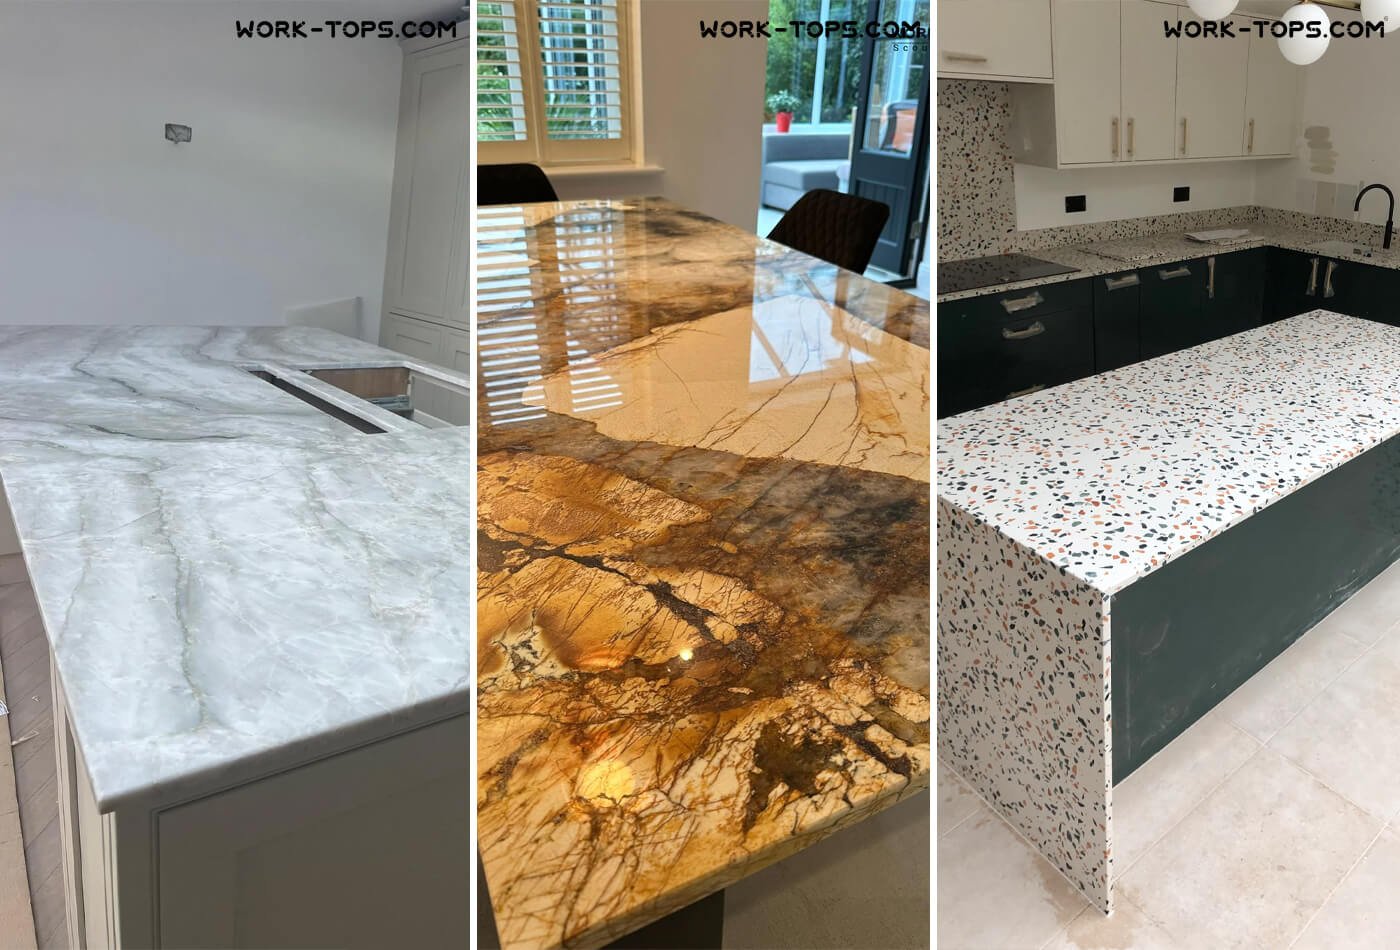 Countertop Material Options From Work-Tops: